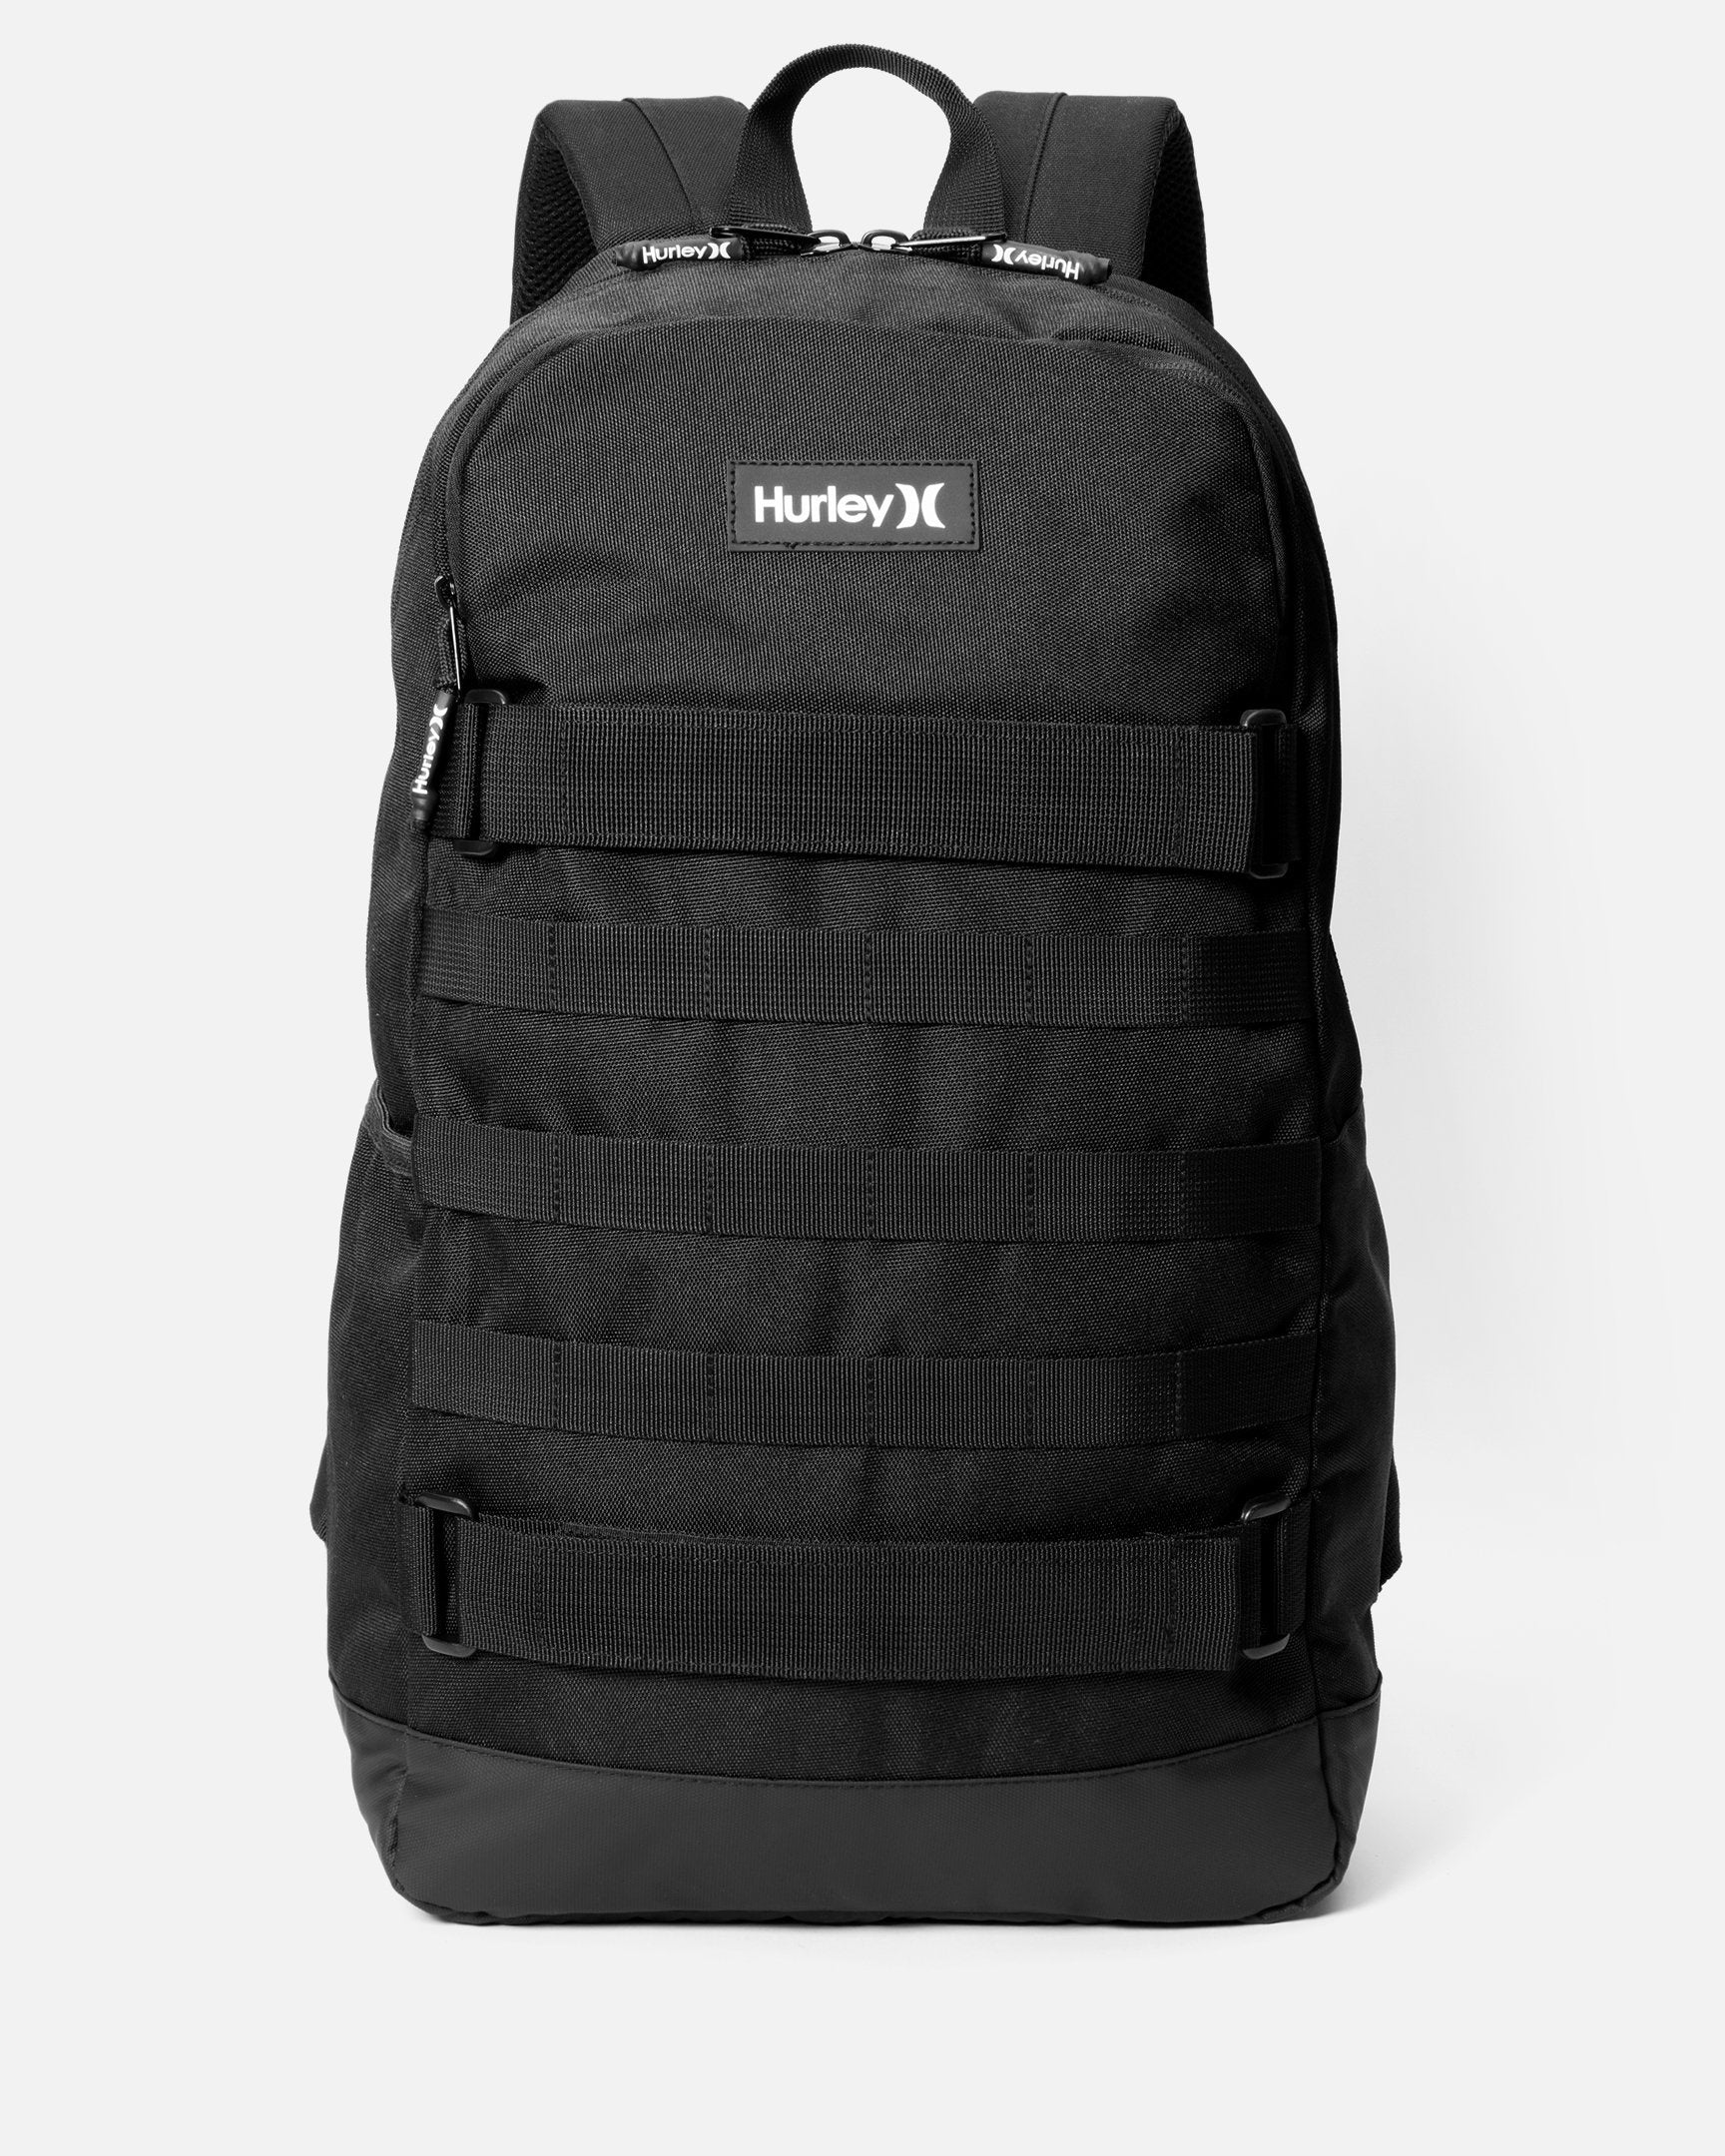 No Comply Backpack